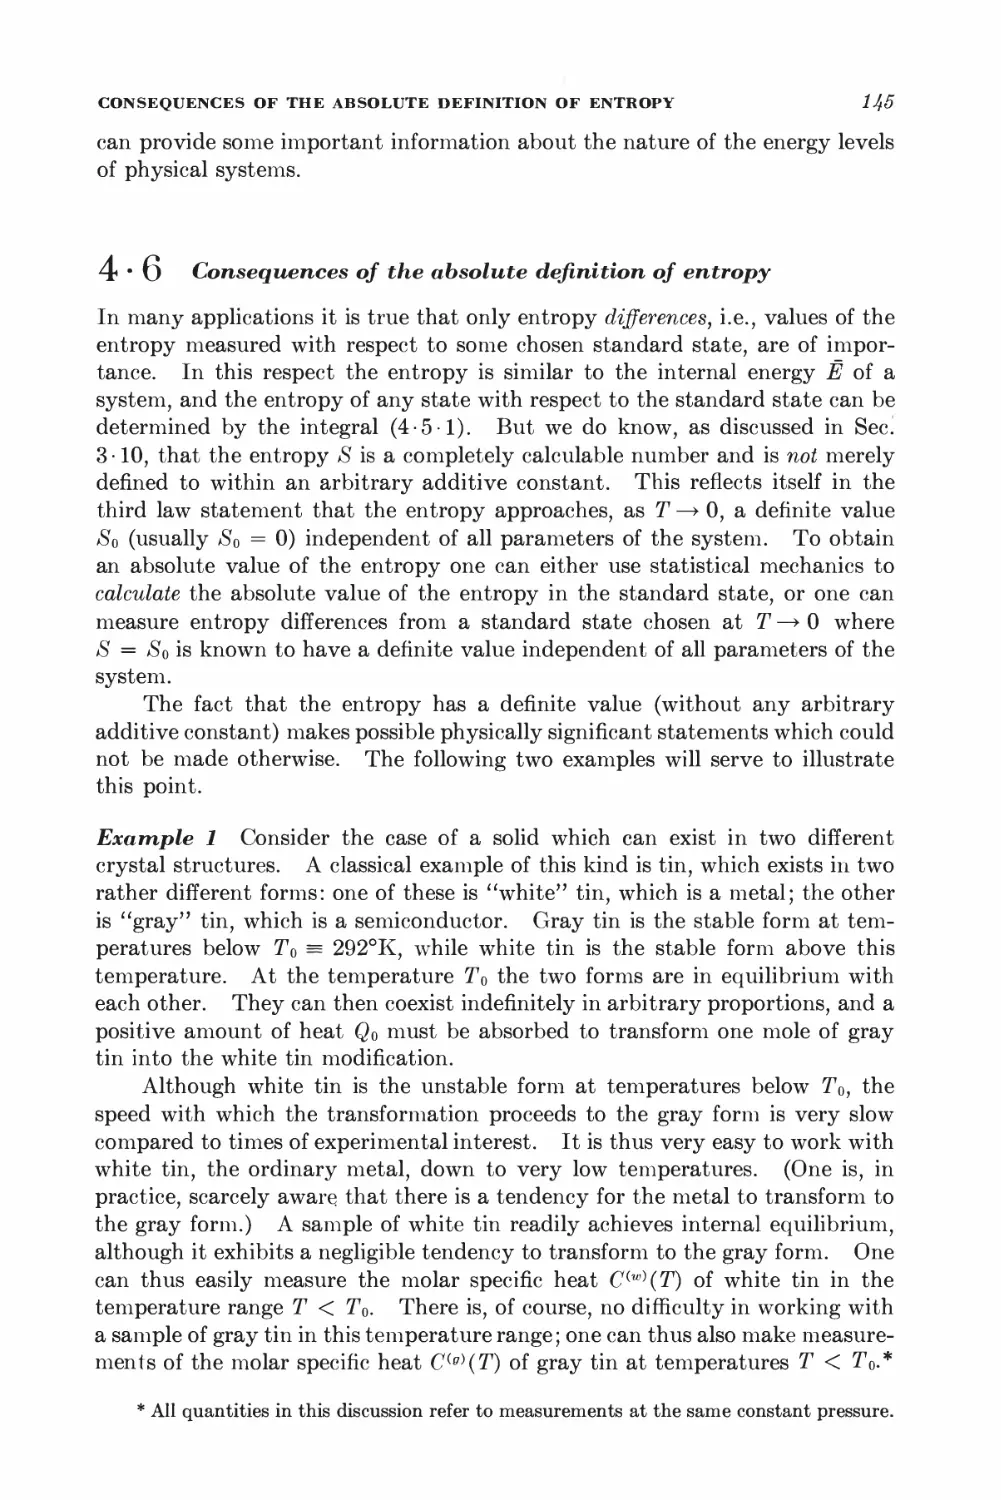 4.6 Consequences of the absolute definition of entropy